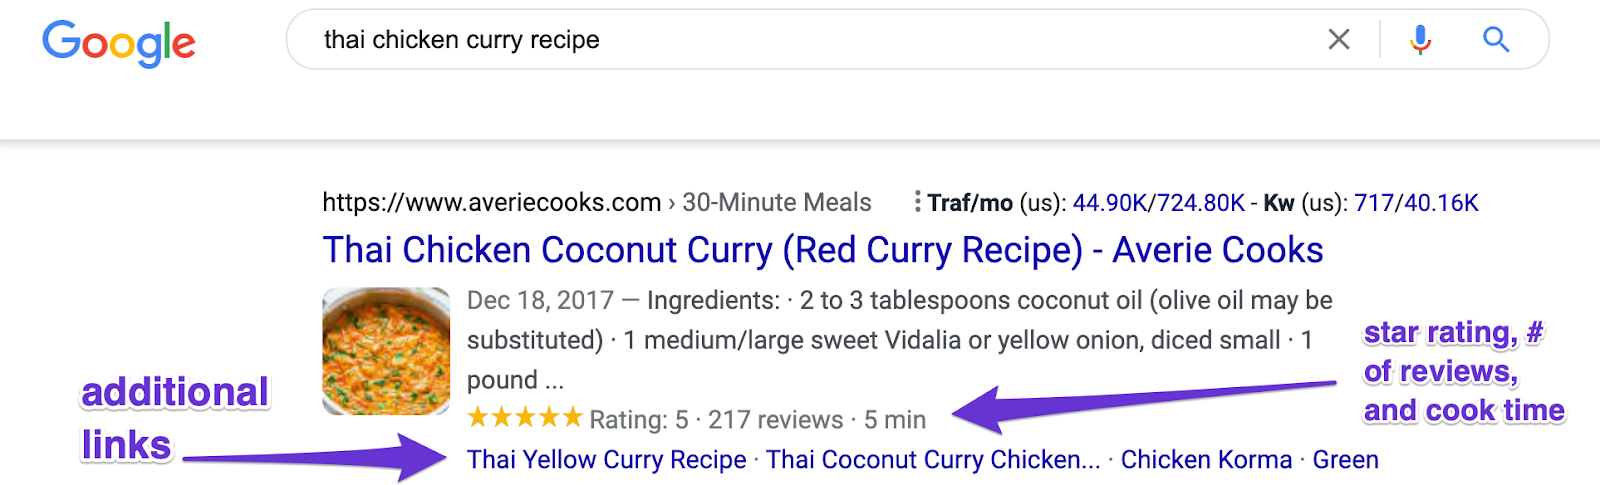 rich snippet search result